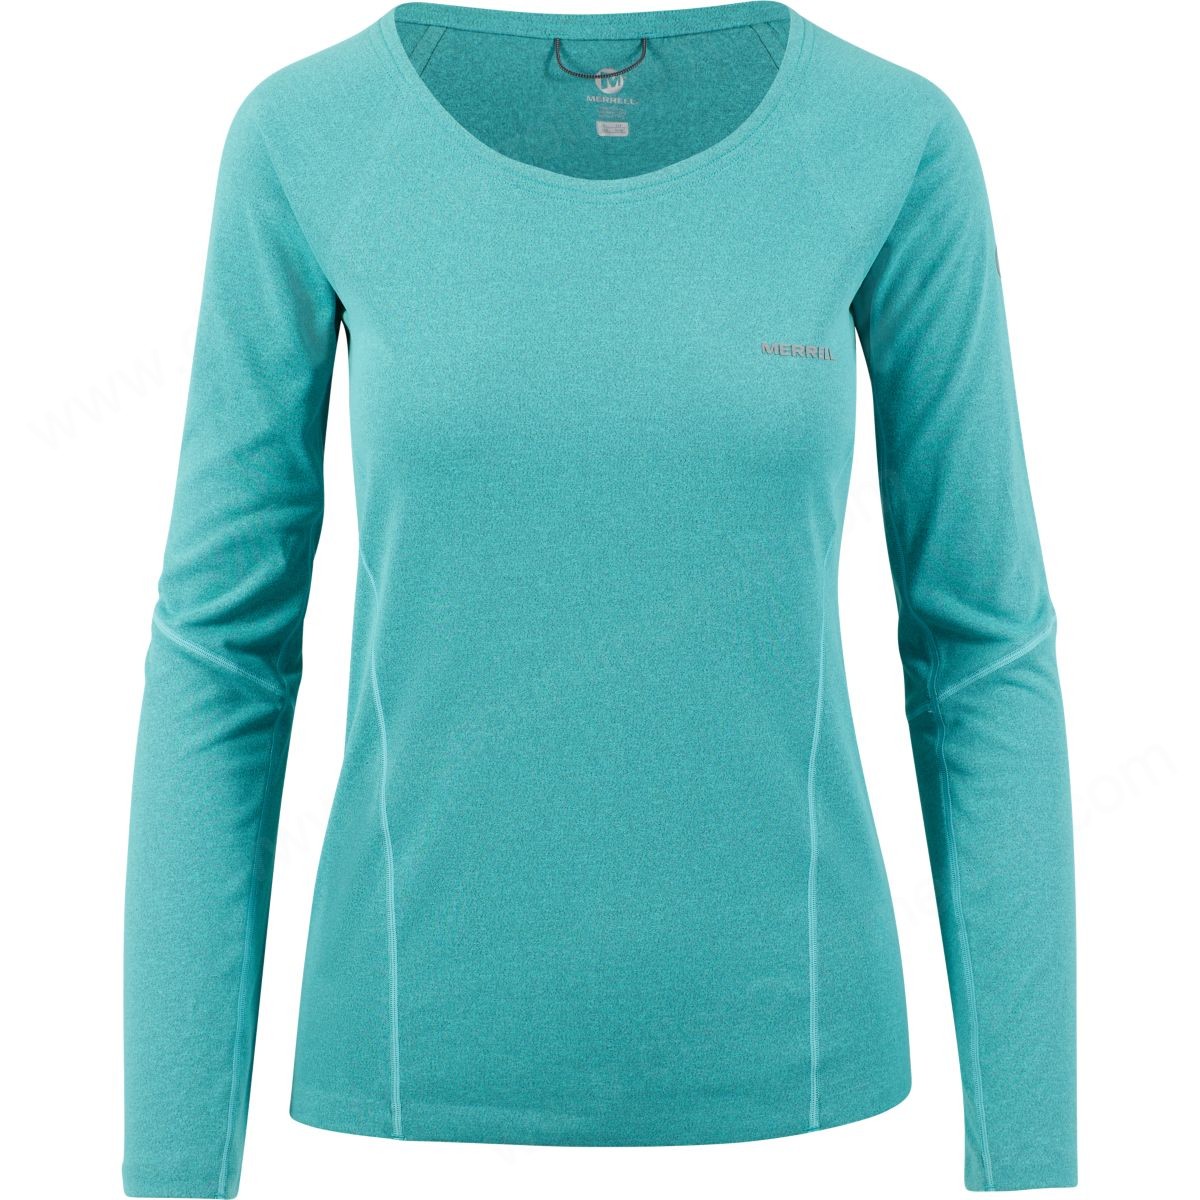 Merrell Women's Long Sleeve Tech T-Shirt With Power Dry® Fabric Baltic Solid - Merrell Women's Long Sleeve Tech T-Shirt With Power Dry® Fabric Baltic Solid